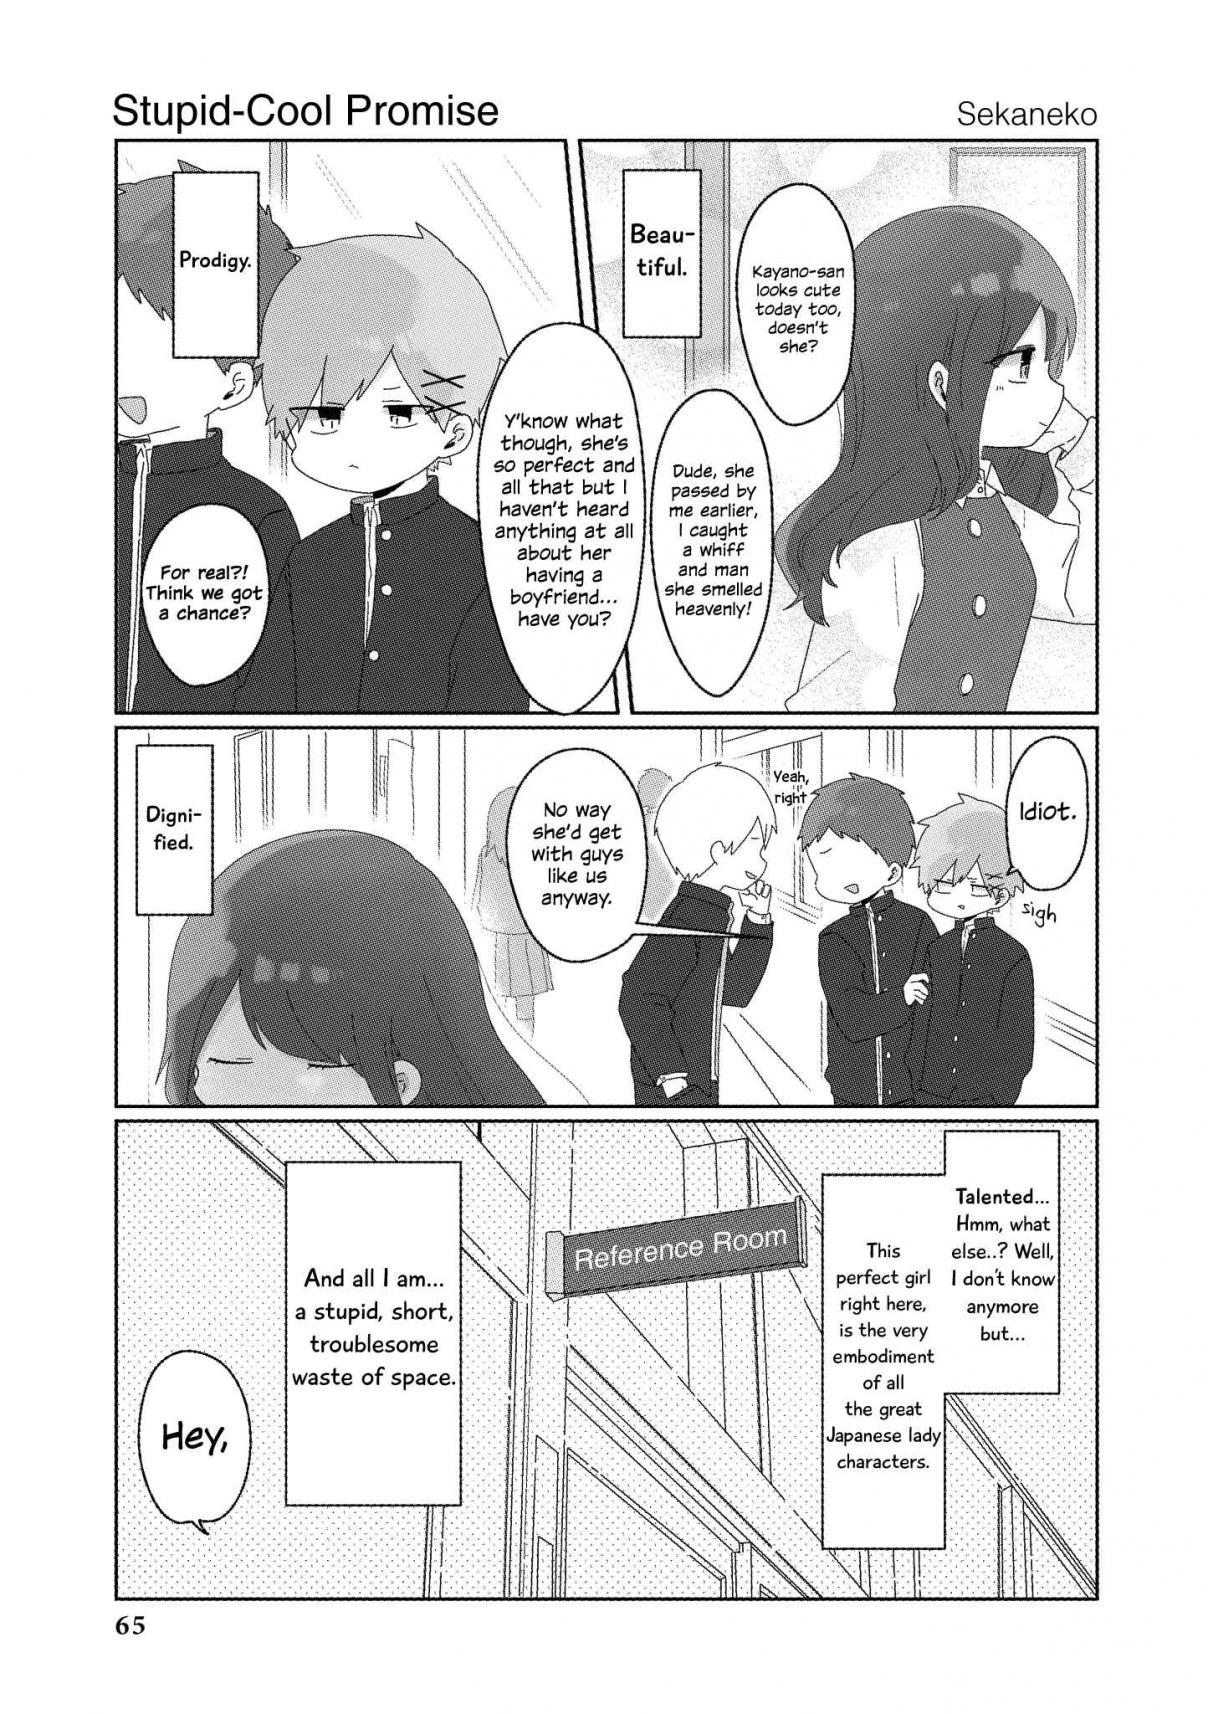 “It’s Too Precious and Hard to Read!!” 4P Short Stories Vol. 2 Ch. 37 Stupid Cool Promise [by Sekaneko]